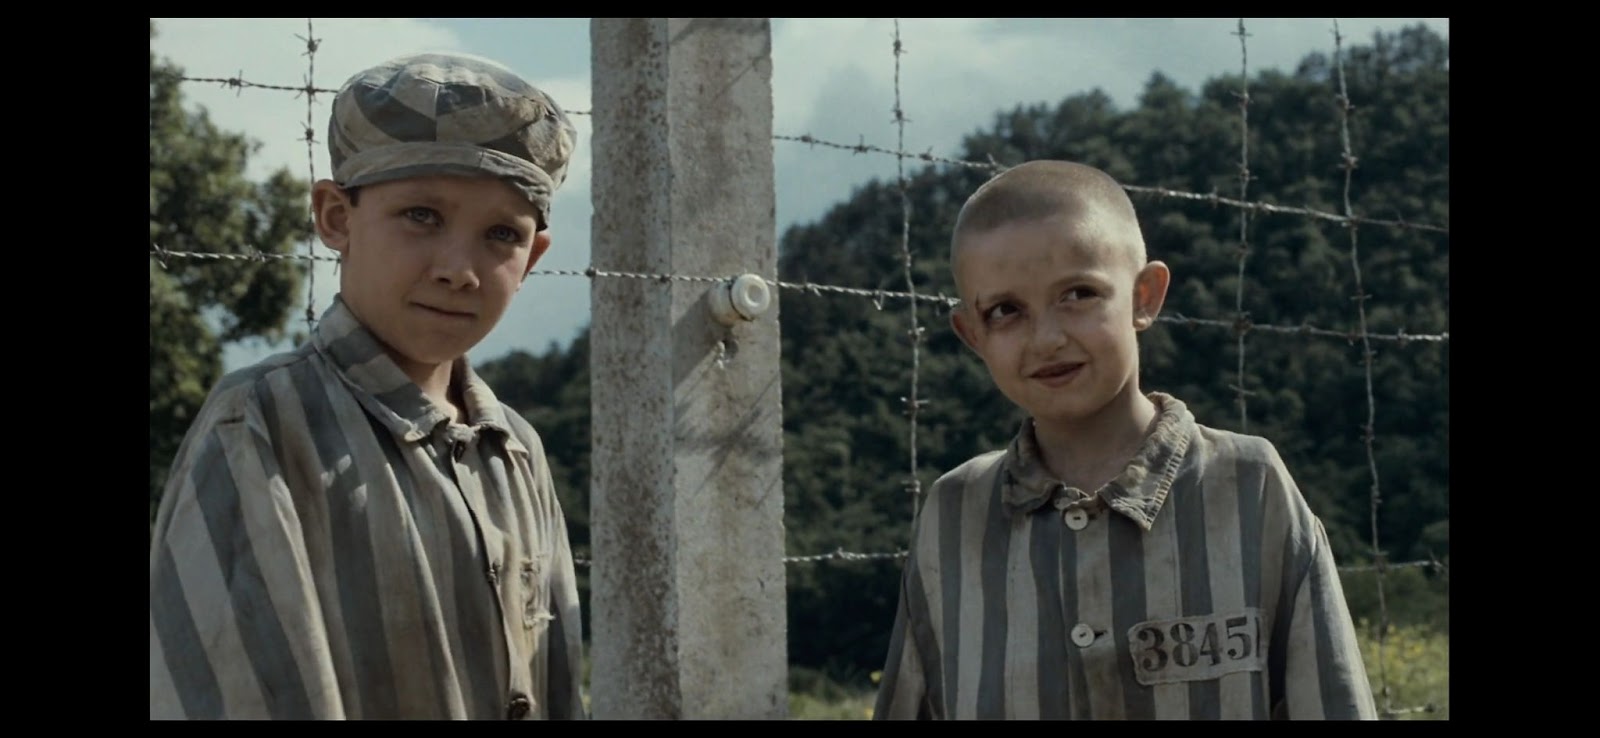 Movie Review: 'The Boy In The Striped Pajamas' - The Holocaust Through  Innocent Eyes